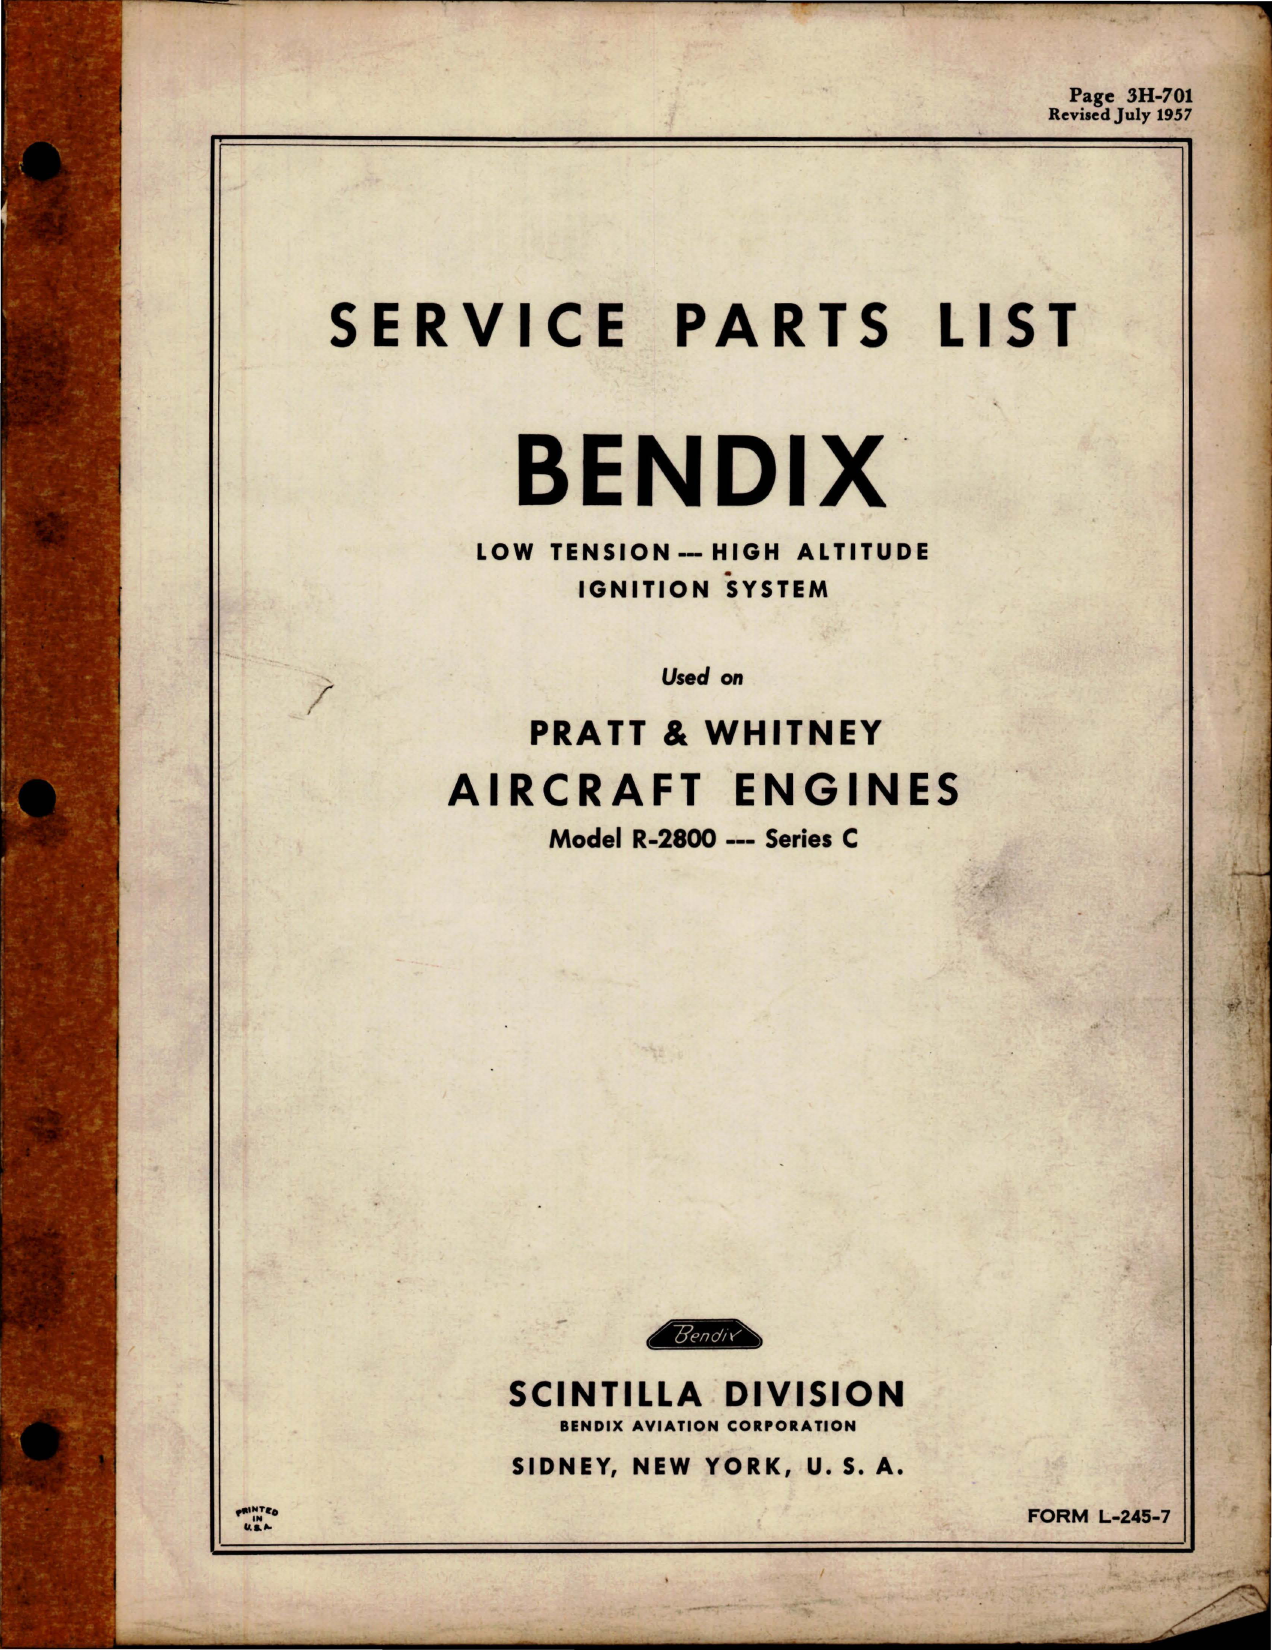 Sample page 1 from AirCorps Library document: Service Parts List for Bendix Low Tension High Altitude Ignition System